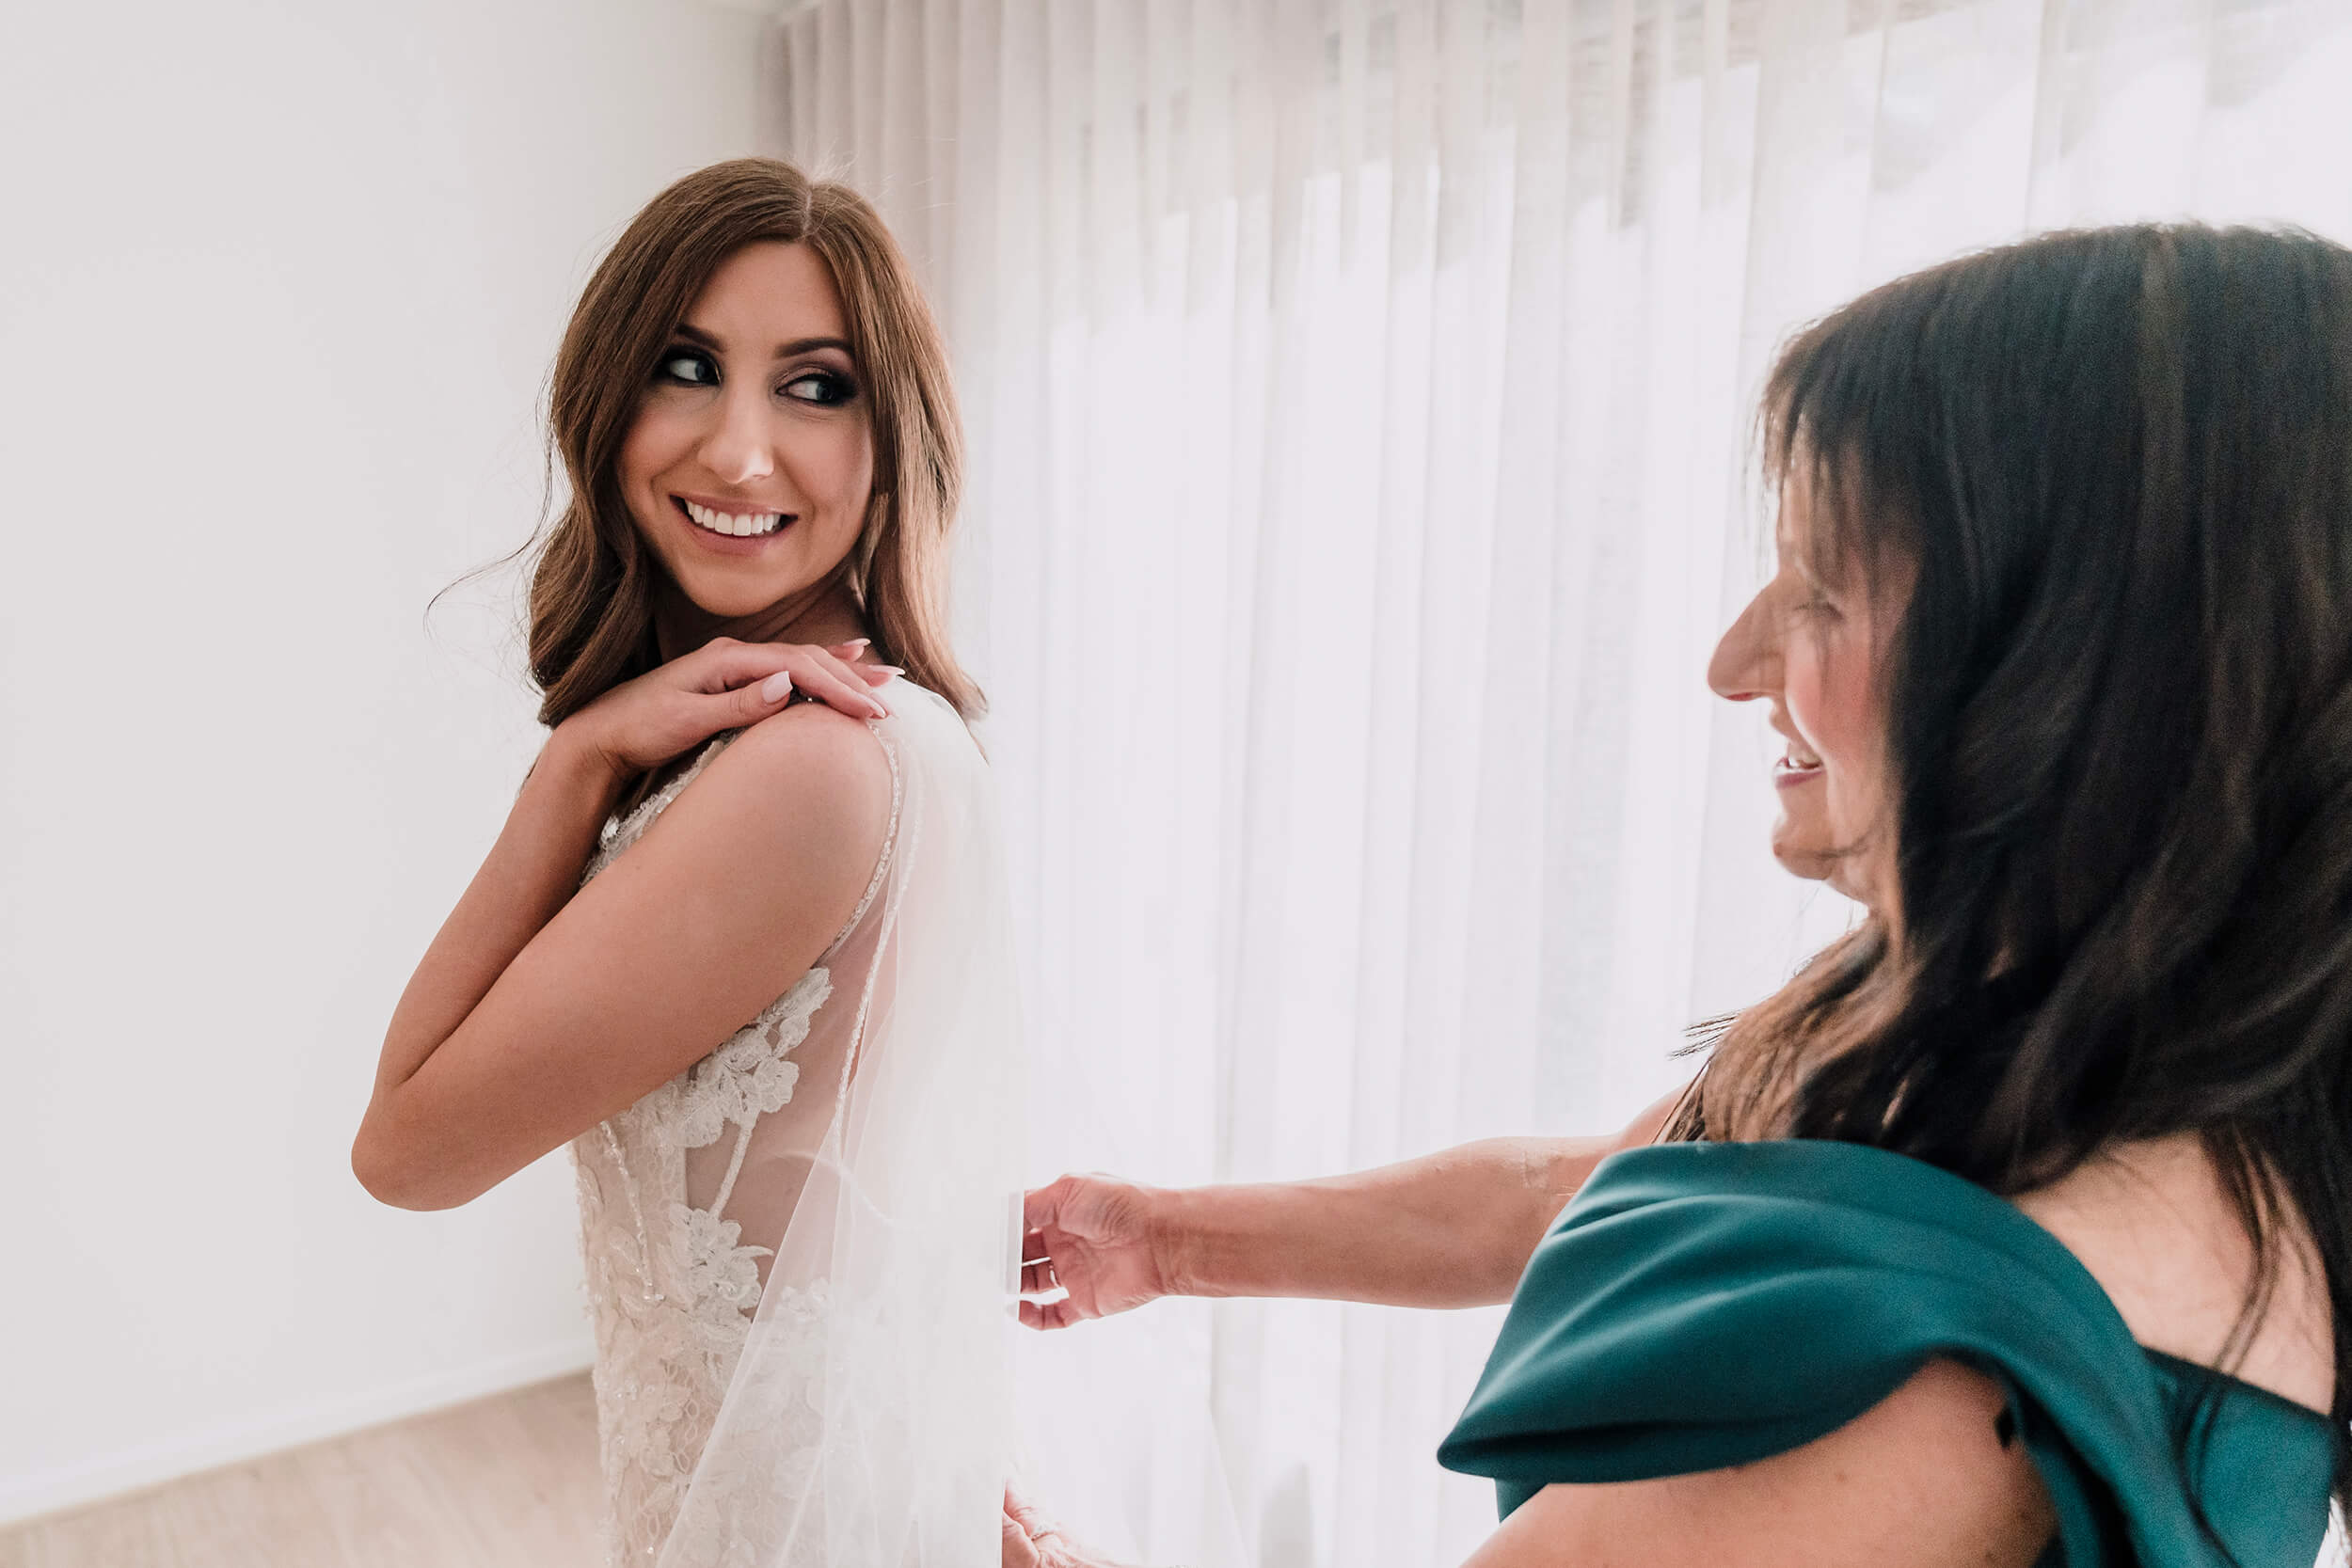 Engagement Shoot Preparations, helping the bride put on her wedding dress , captured by Black Avenue Productions